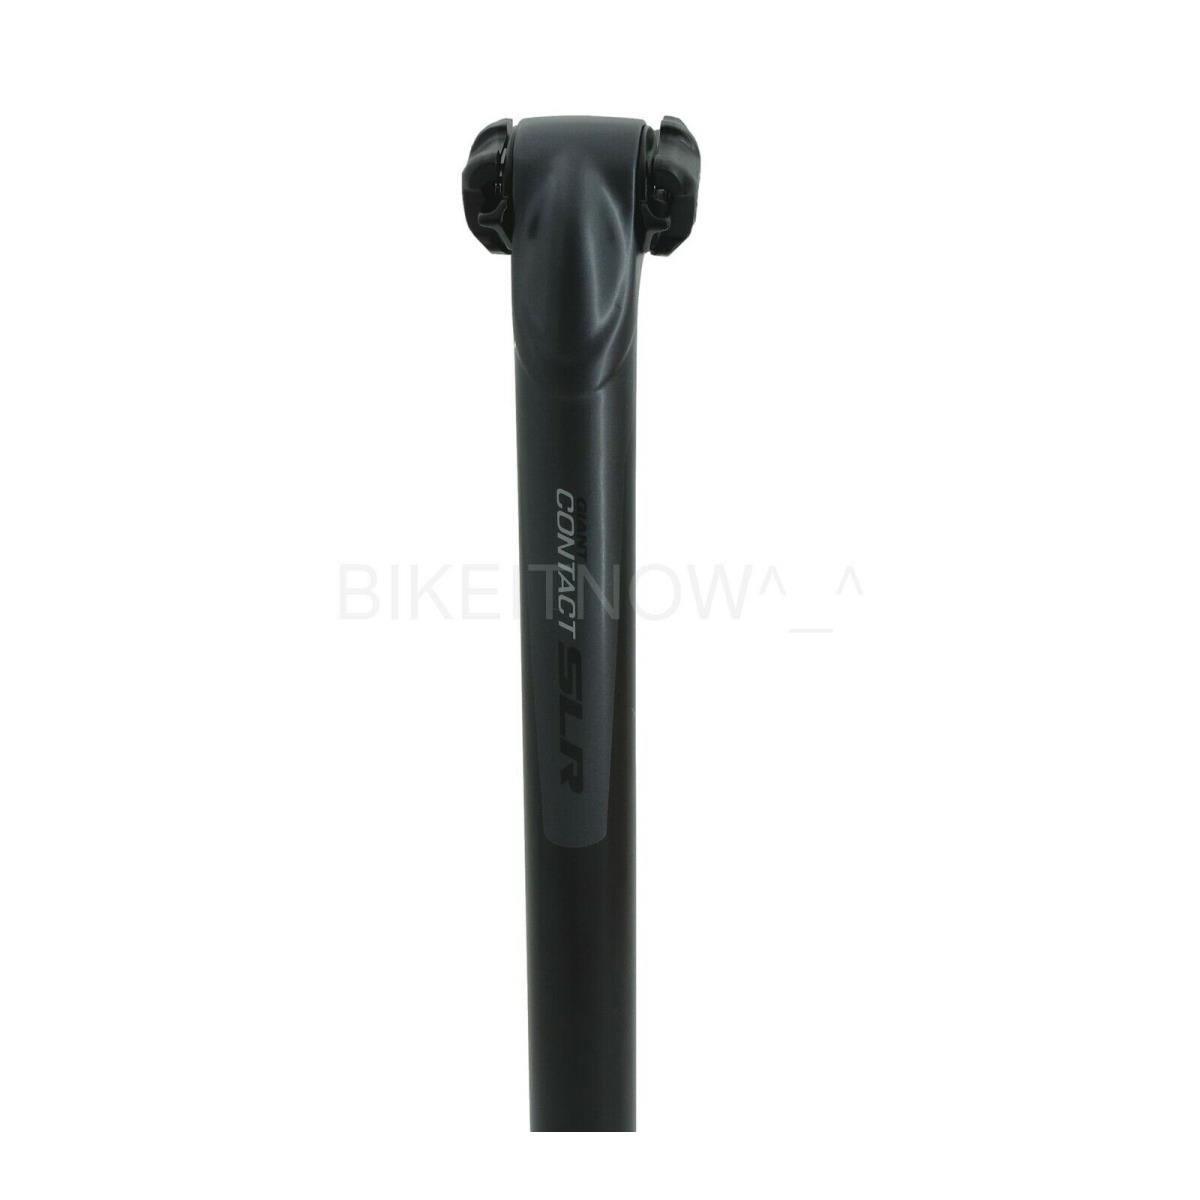 Giantt Contact Slr UD Carbon Seat Post 375 x 30.9mm For Road/mtb Bike Bicycle - Black